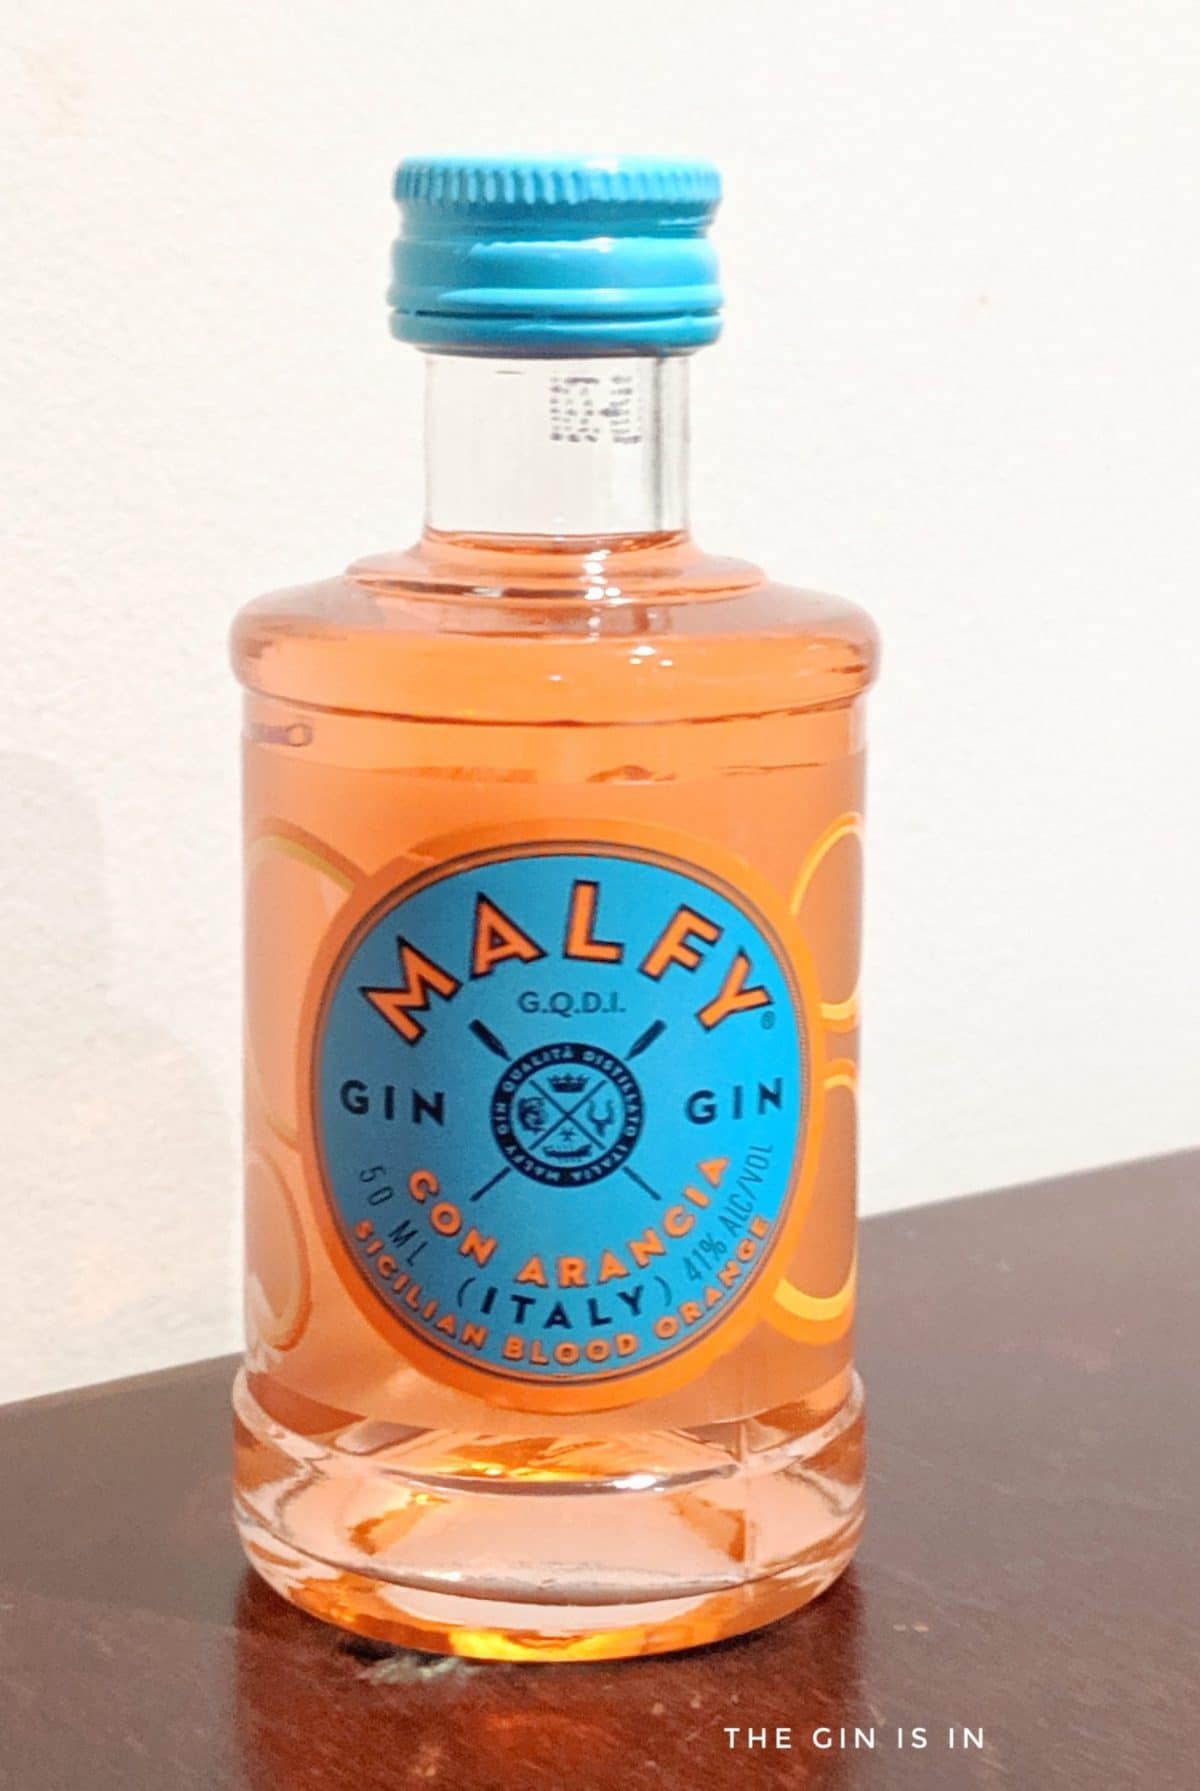 Malfy Gin Con Arancia | Notes Expert Gin and Tasting Review